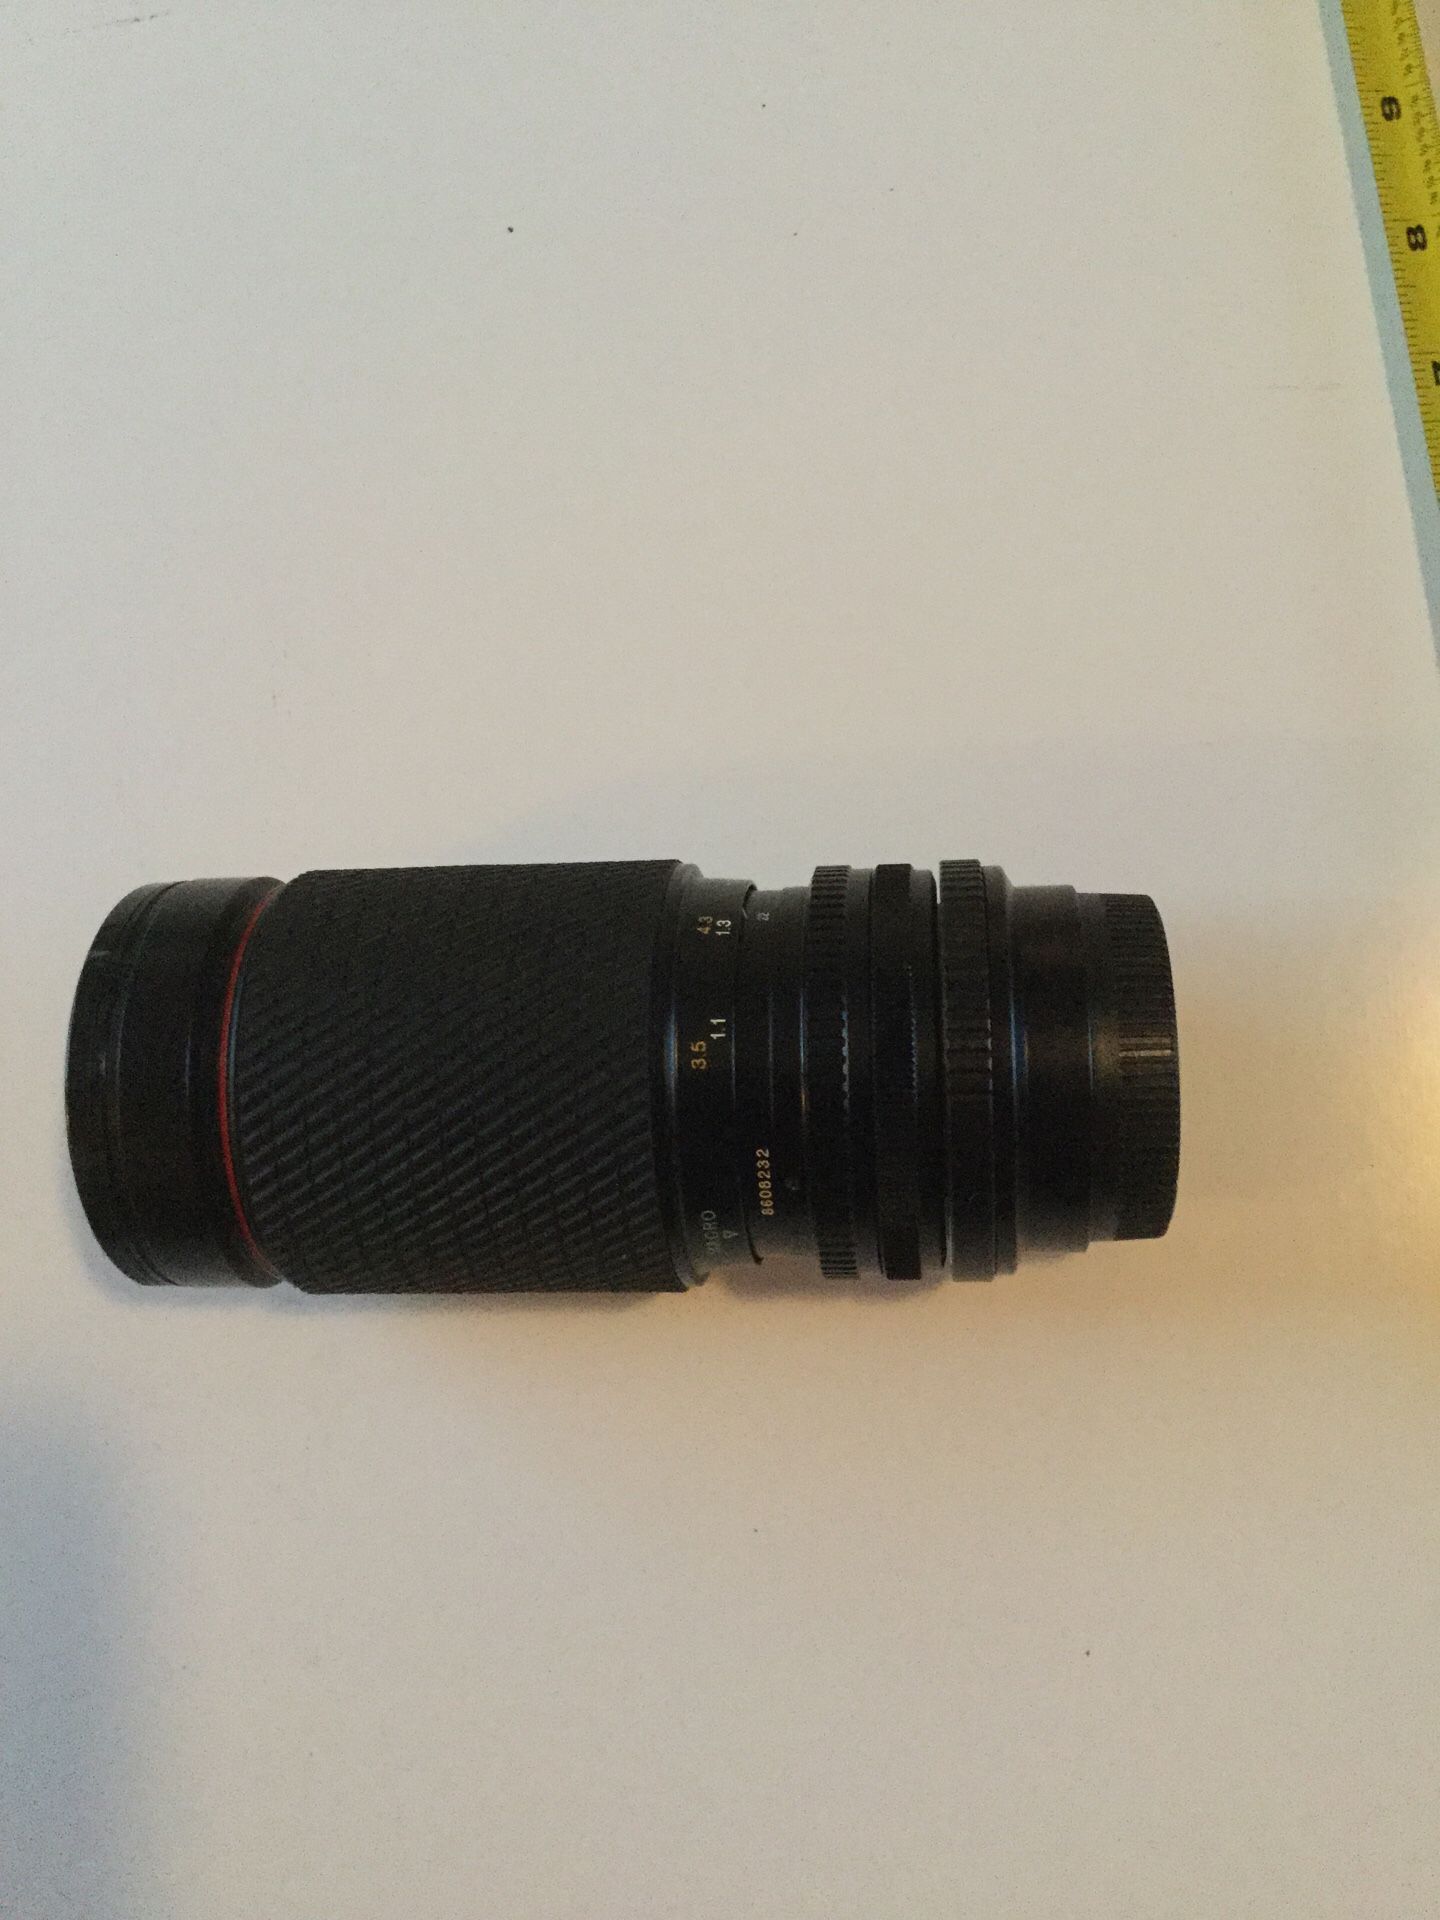 Tokina, 35 - 200 mm, f4 - 5.6 zoom lens with macro and micro 4/3 adapter. Excellent condition!